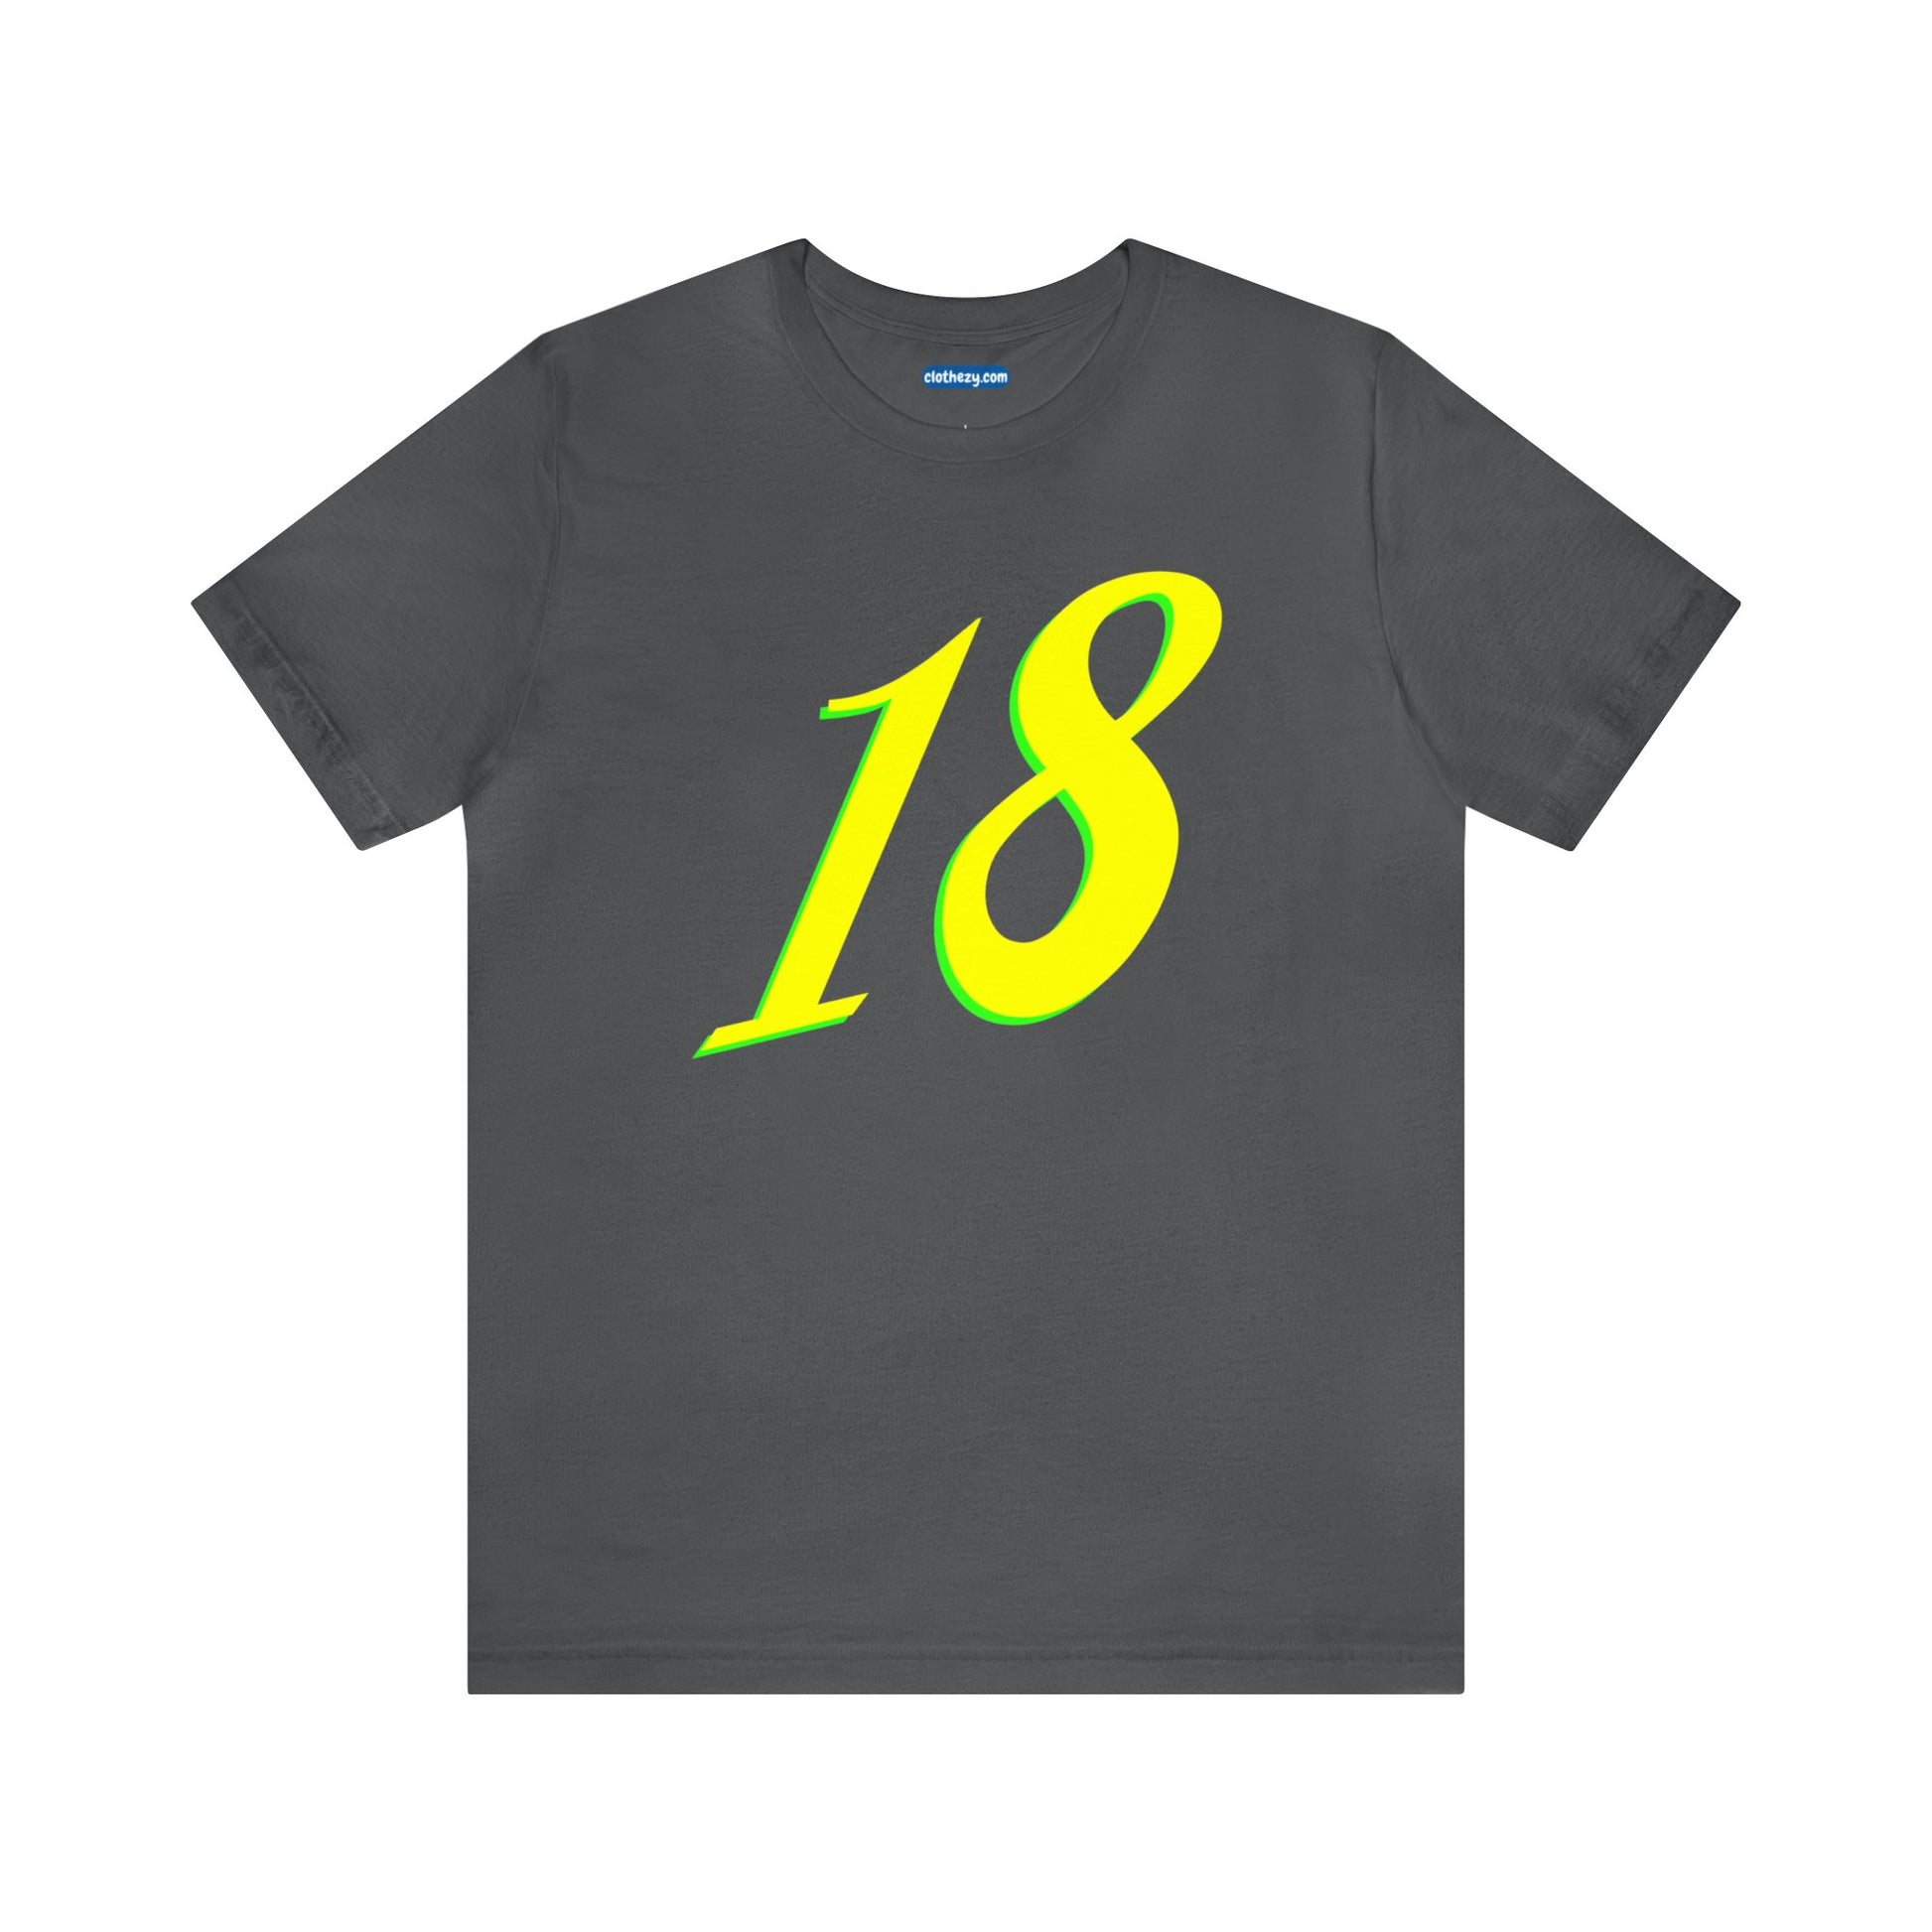 Number 18 Design - Soft Cotton Tee for birthdays and celebrations, Gift for friends and family, Multiple Options by clothezy.com in Black Size Small - Buy Now